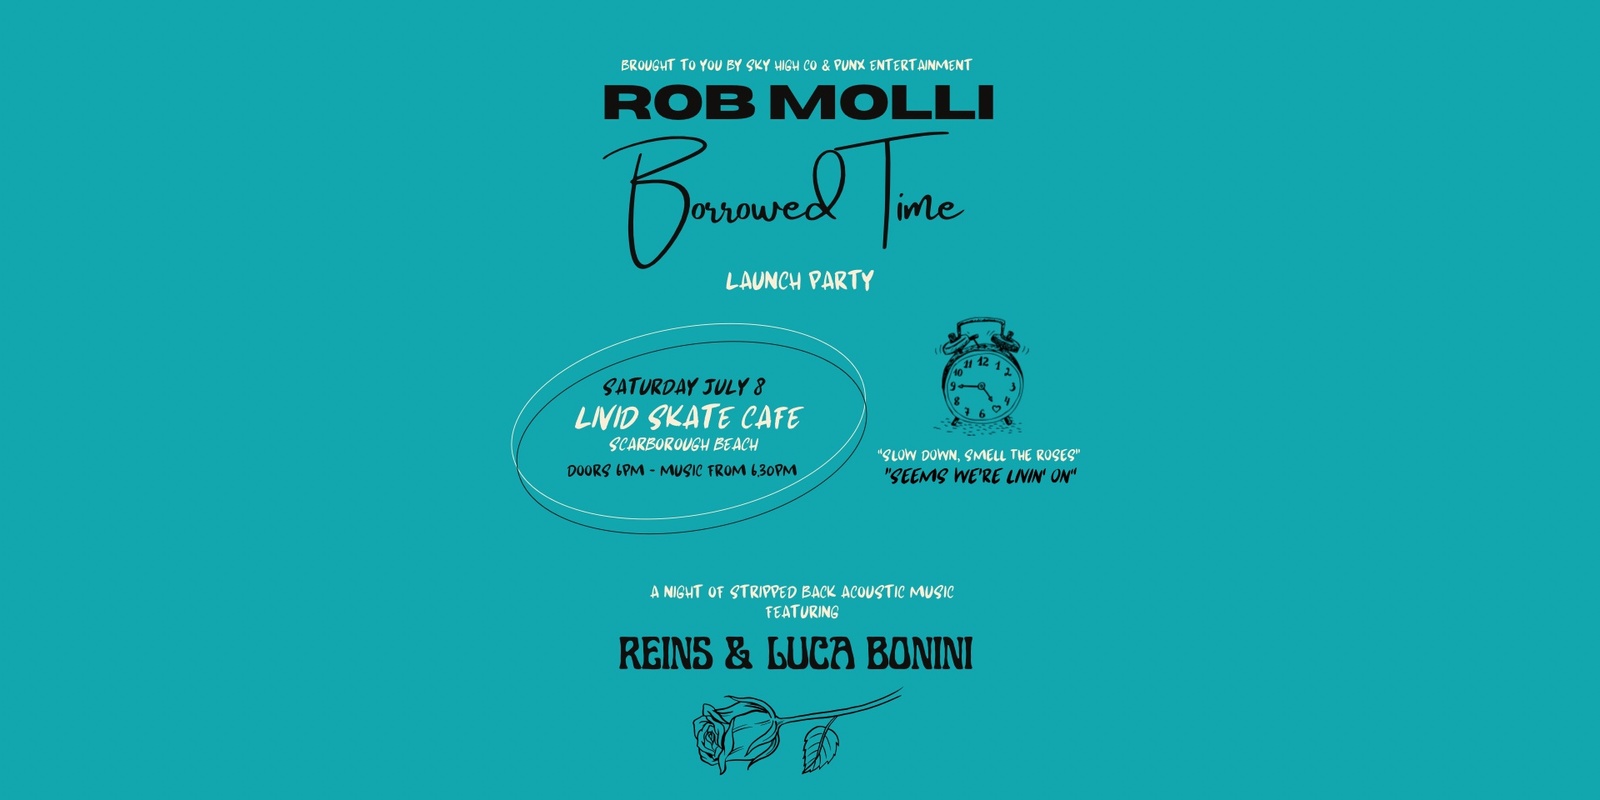 Banner image for ROB MOLLI BORROWED TIME LAUNCH PARTY